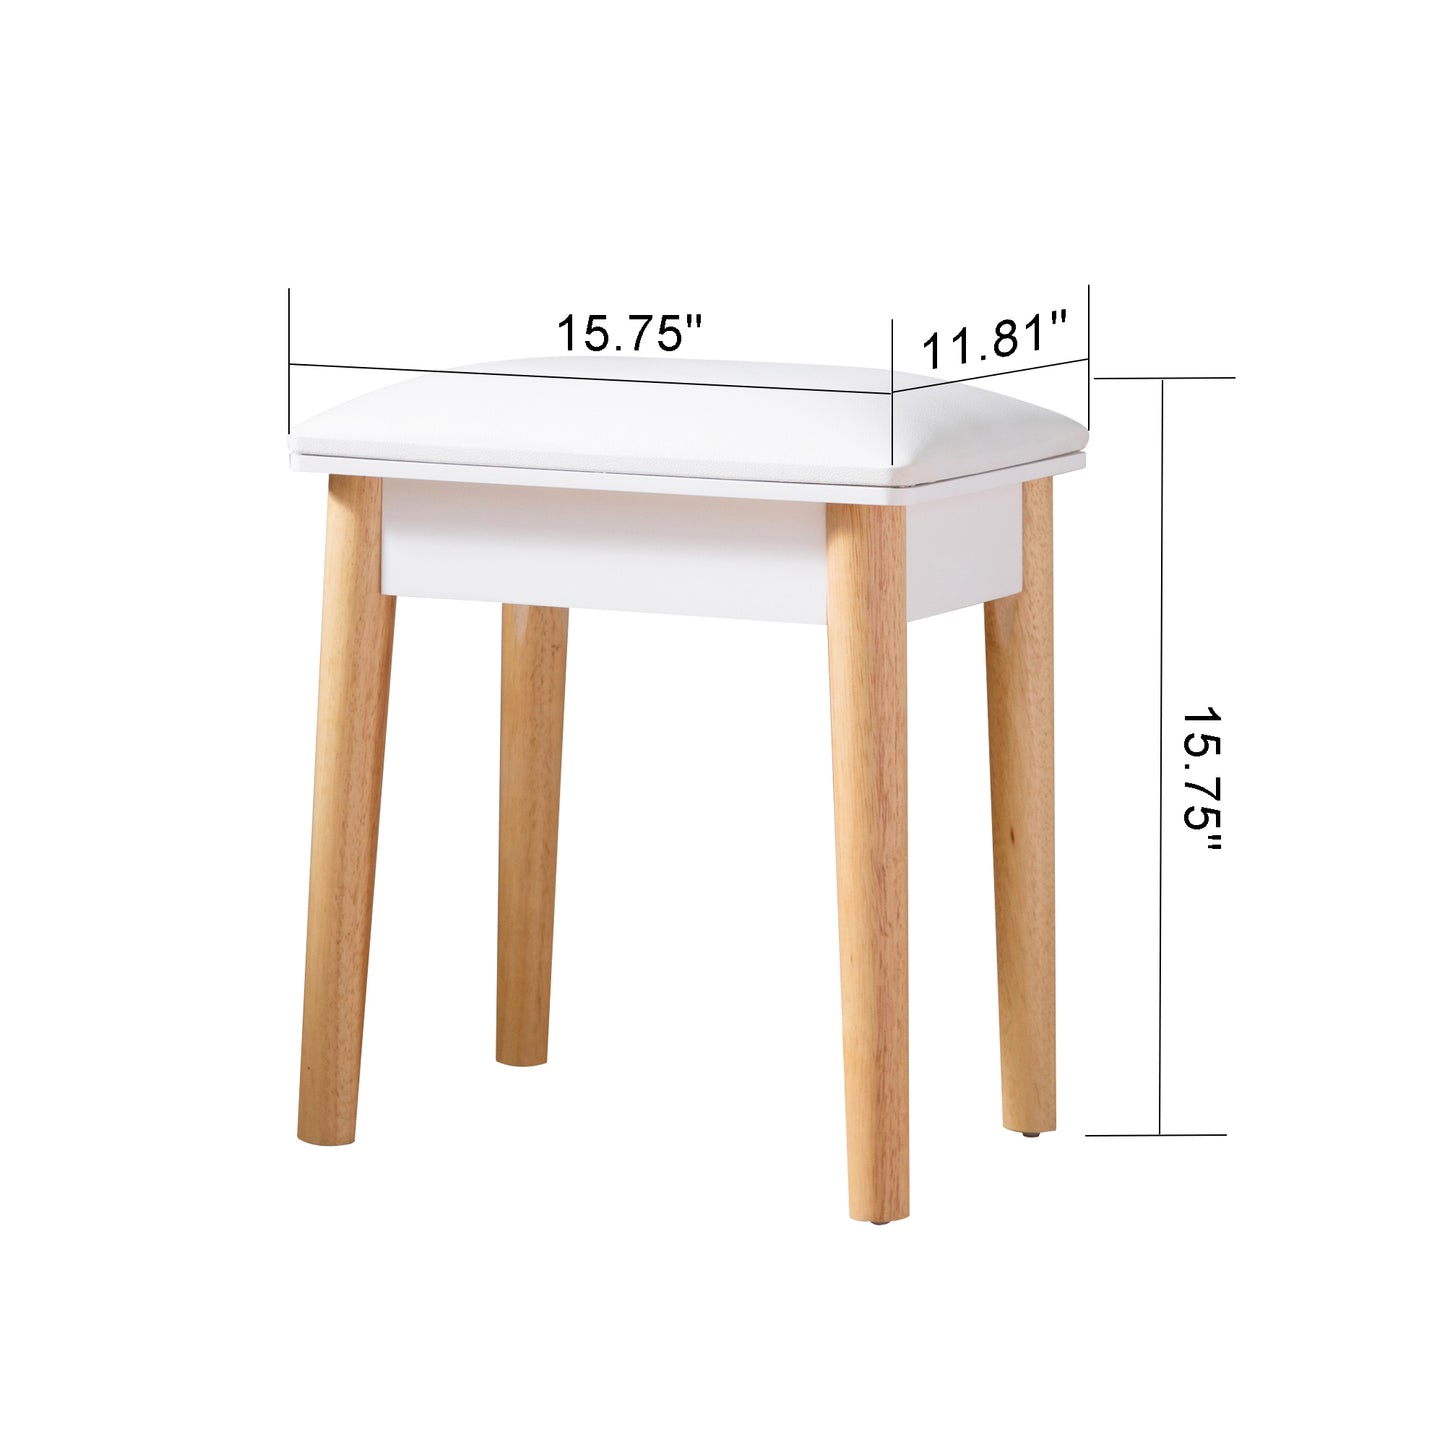 Wooden Vanity Stool Makeup Dressing Stool with PU Seat, White